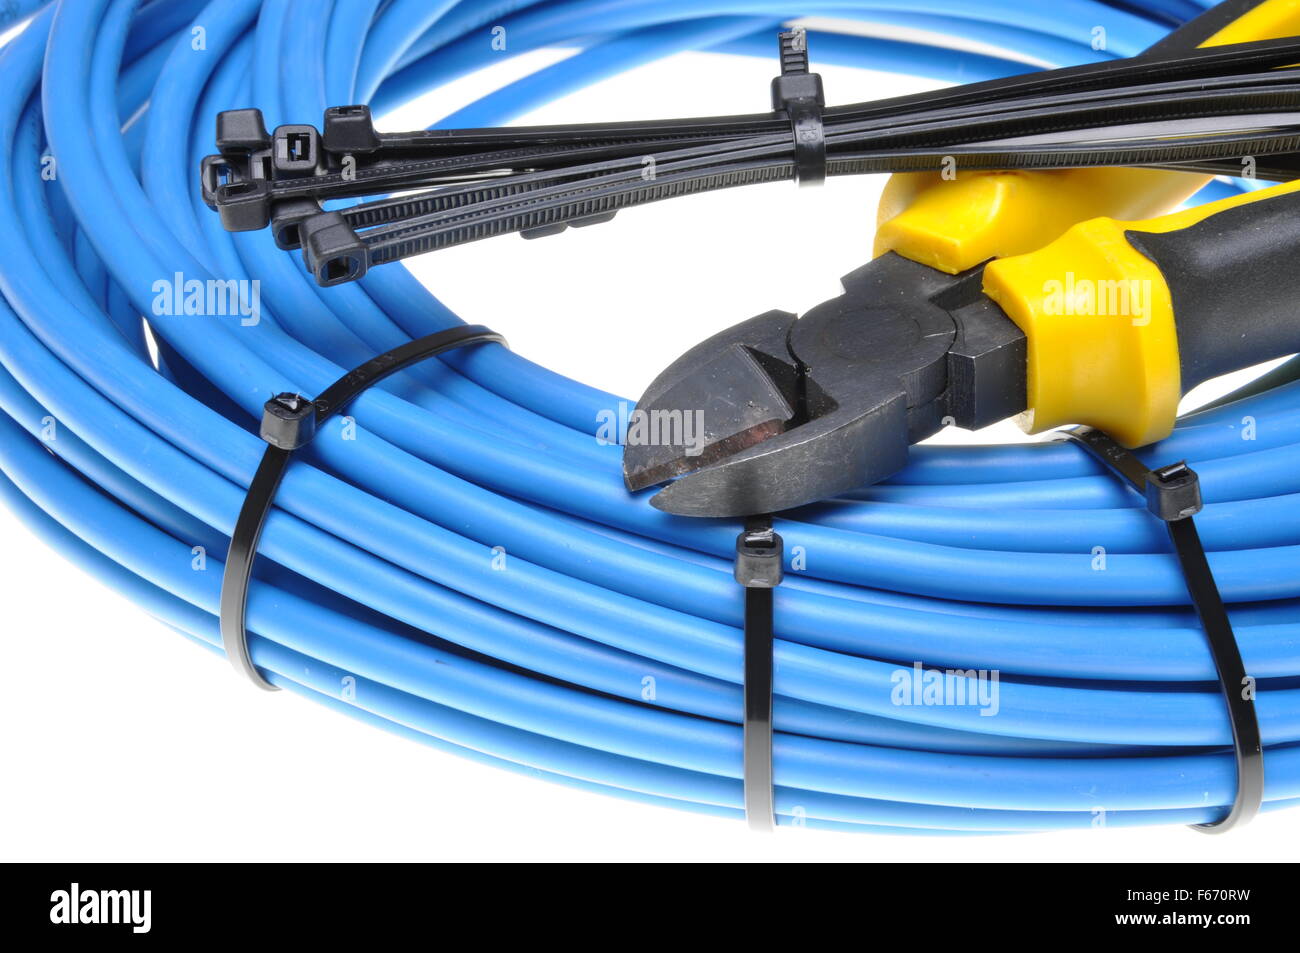 Pliers with electrical cables and cable ties Stock Photo